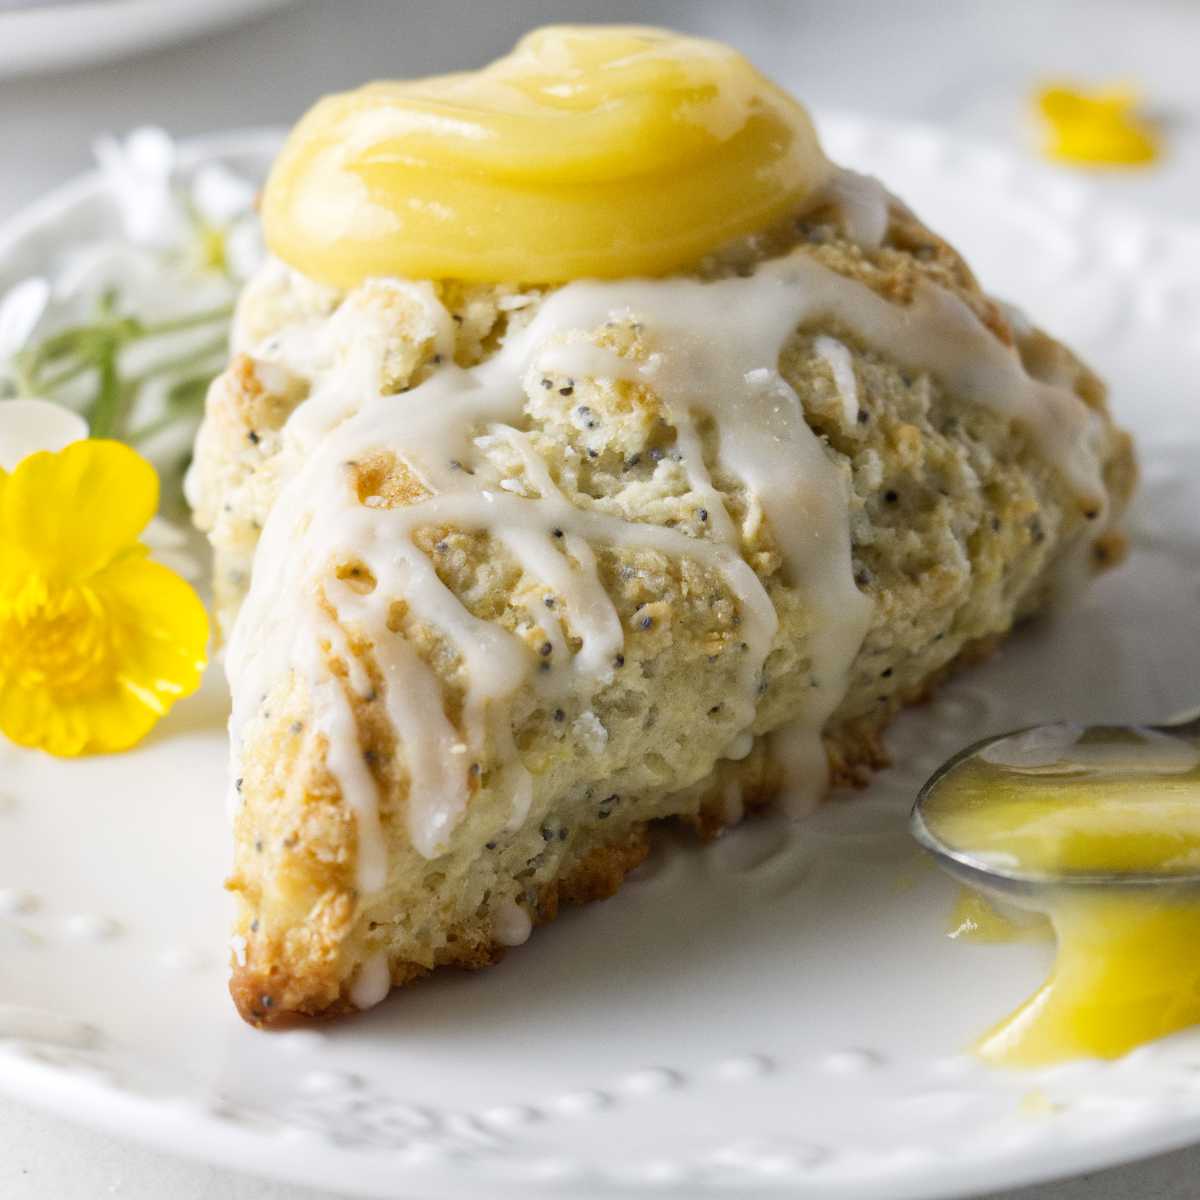 A lemon poppy seeds scone with a dollop of lemon curd on top.